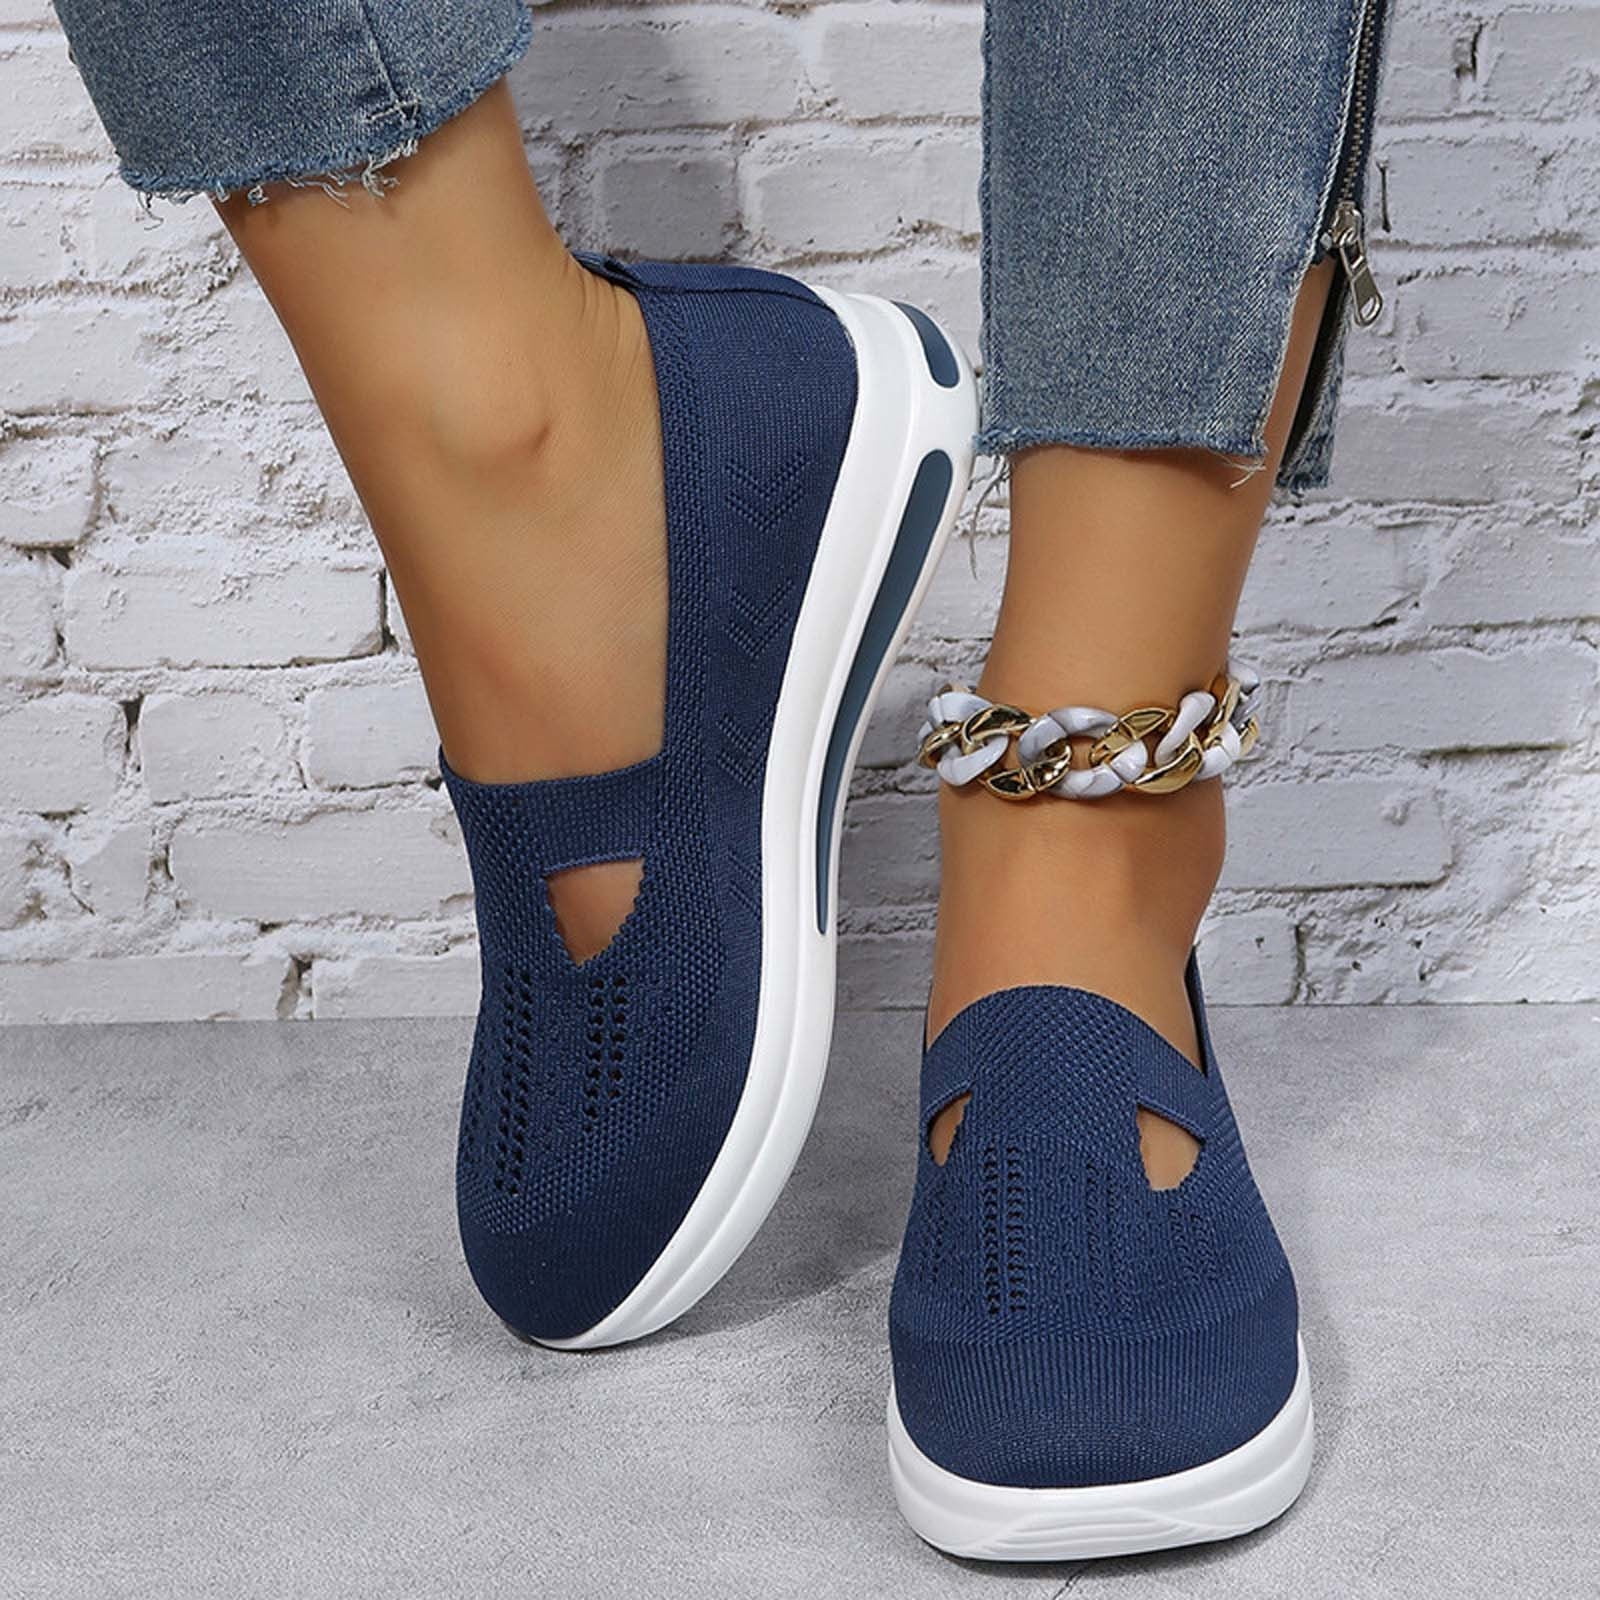 YUNAFFT Clearance Women, Large Size Rocking Shoes Women's Shoes Casual Shoes Thick Bottom Breathable Shoes - Walmart.com